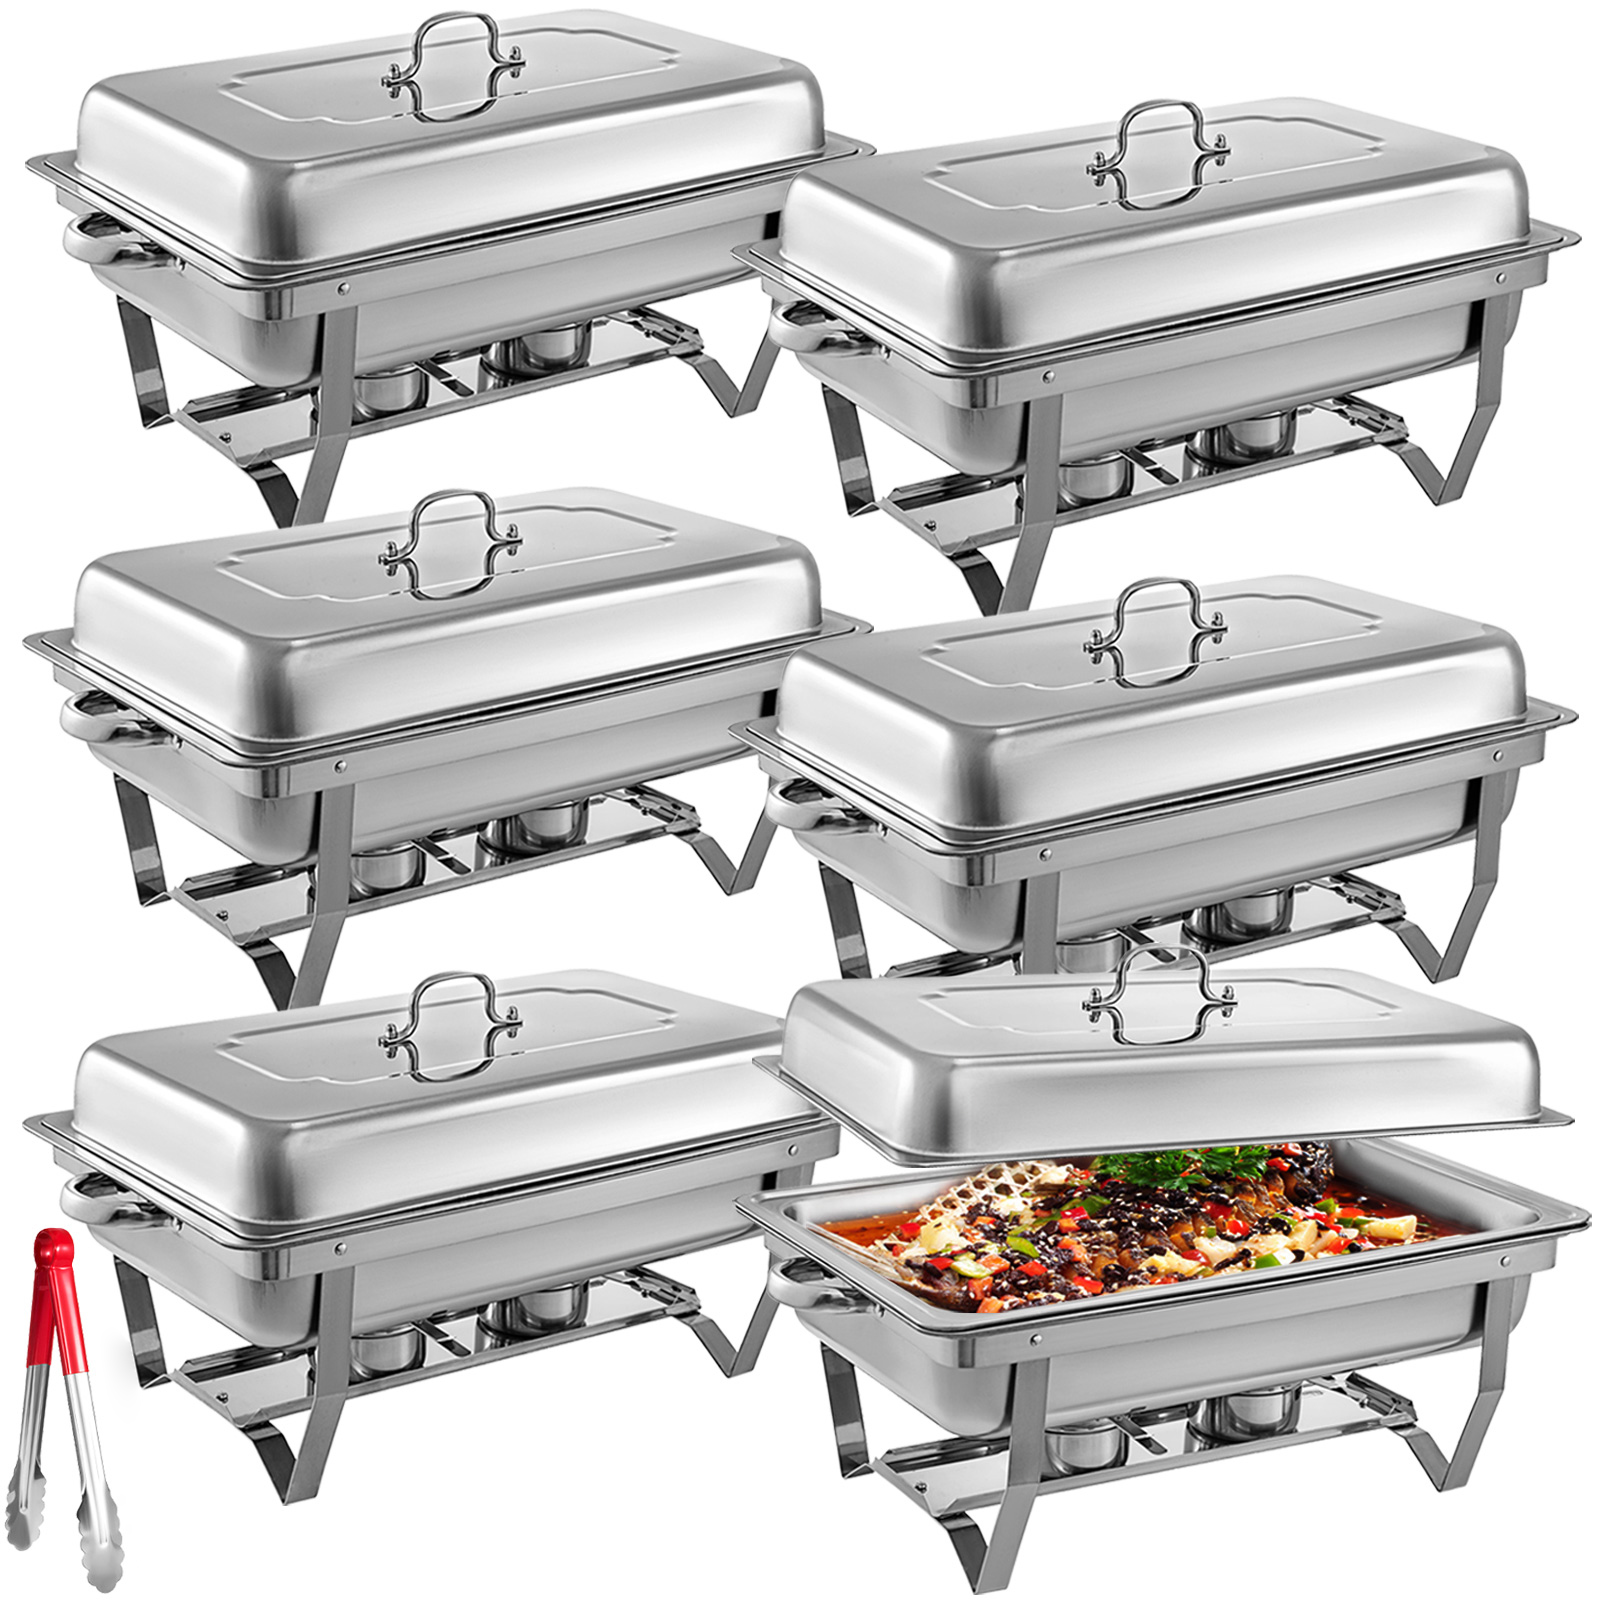 6 Pack Catering Stainless Steel Chafer Chafing Dish Sets 8qt Buffet от Vevor Many GEOs